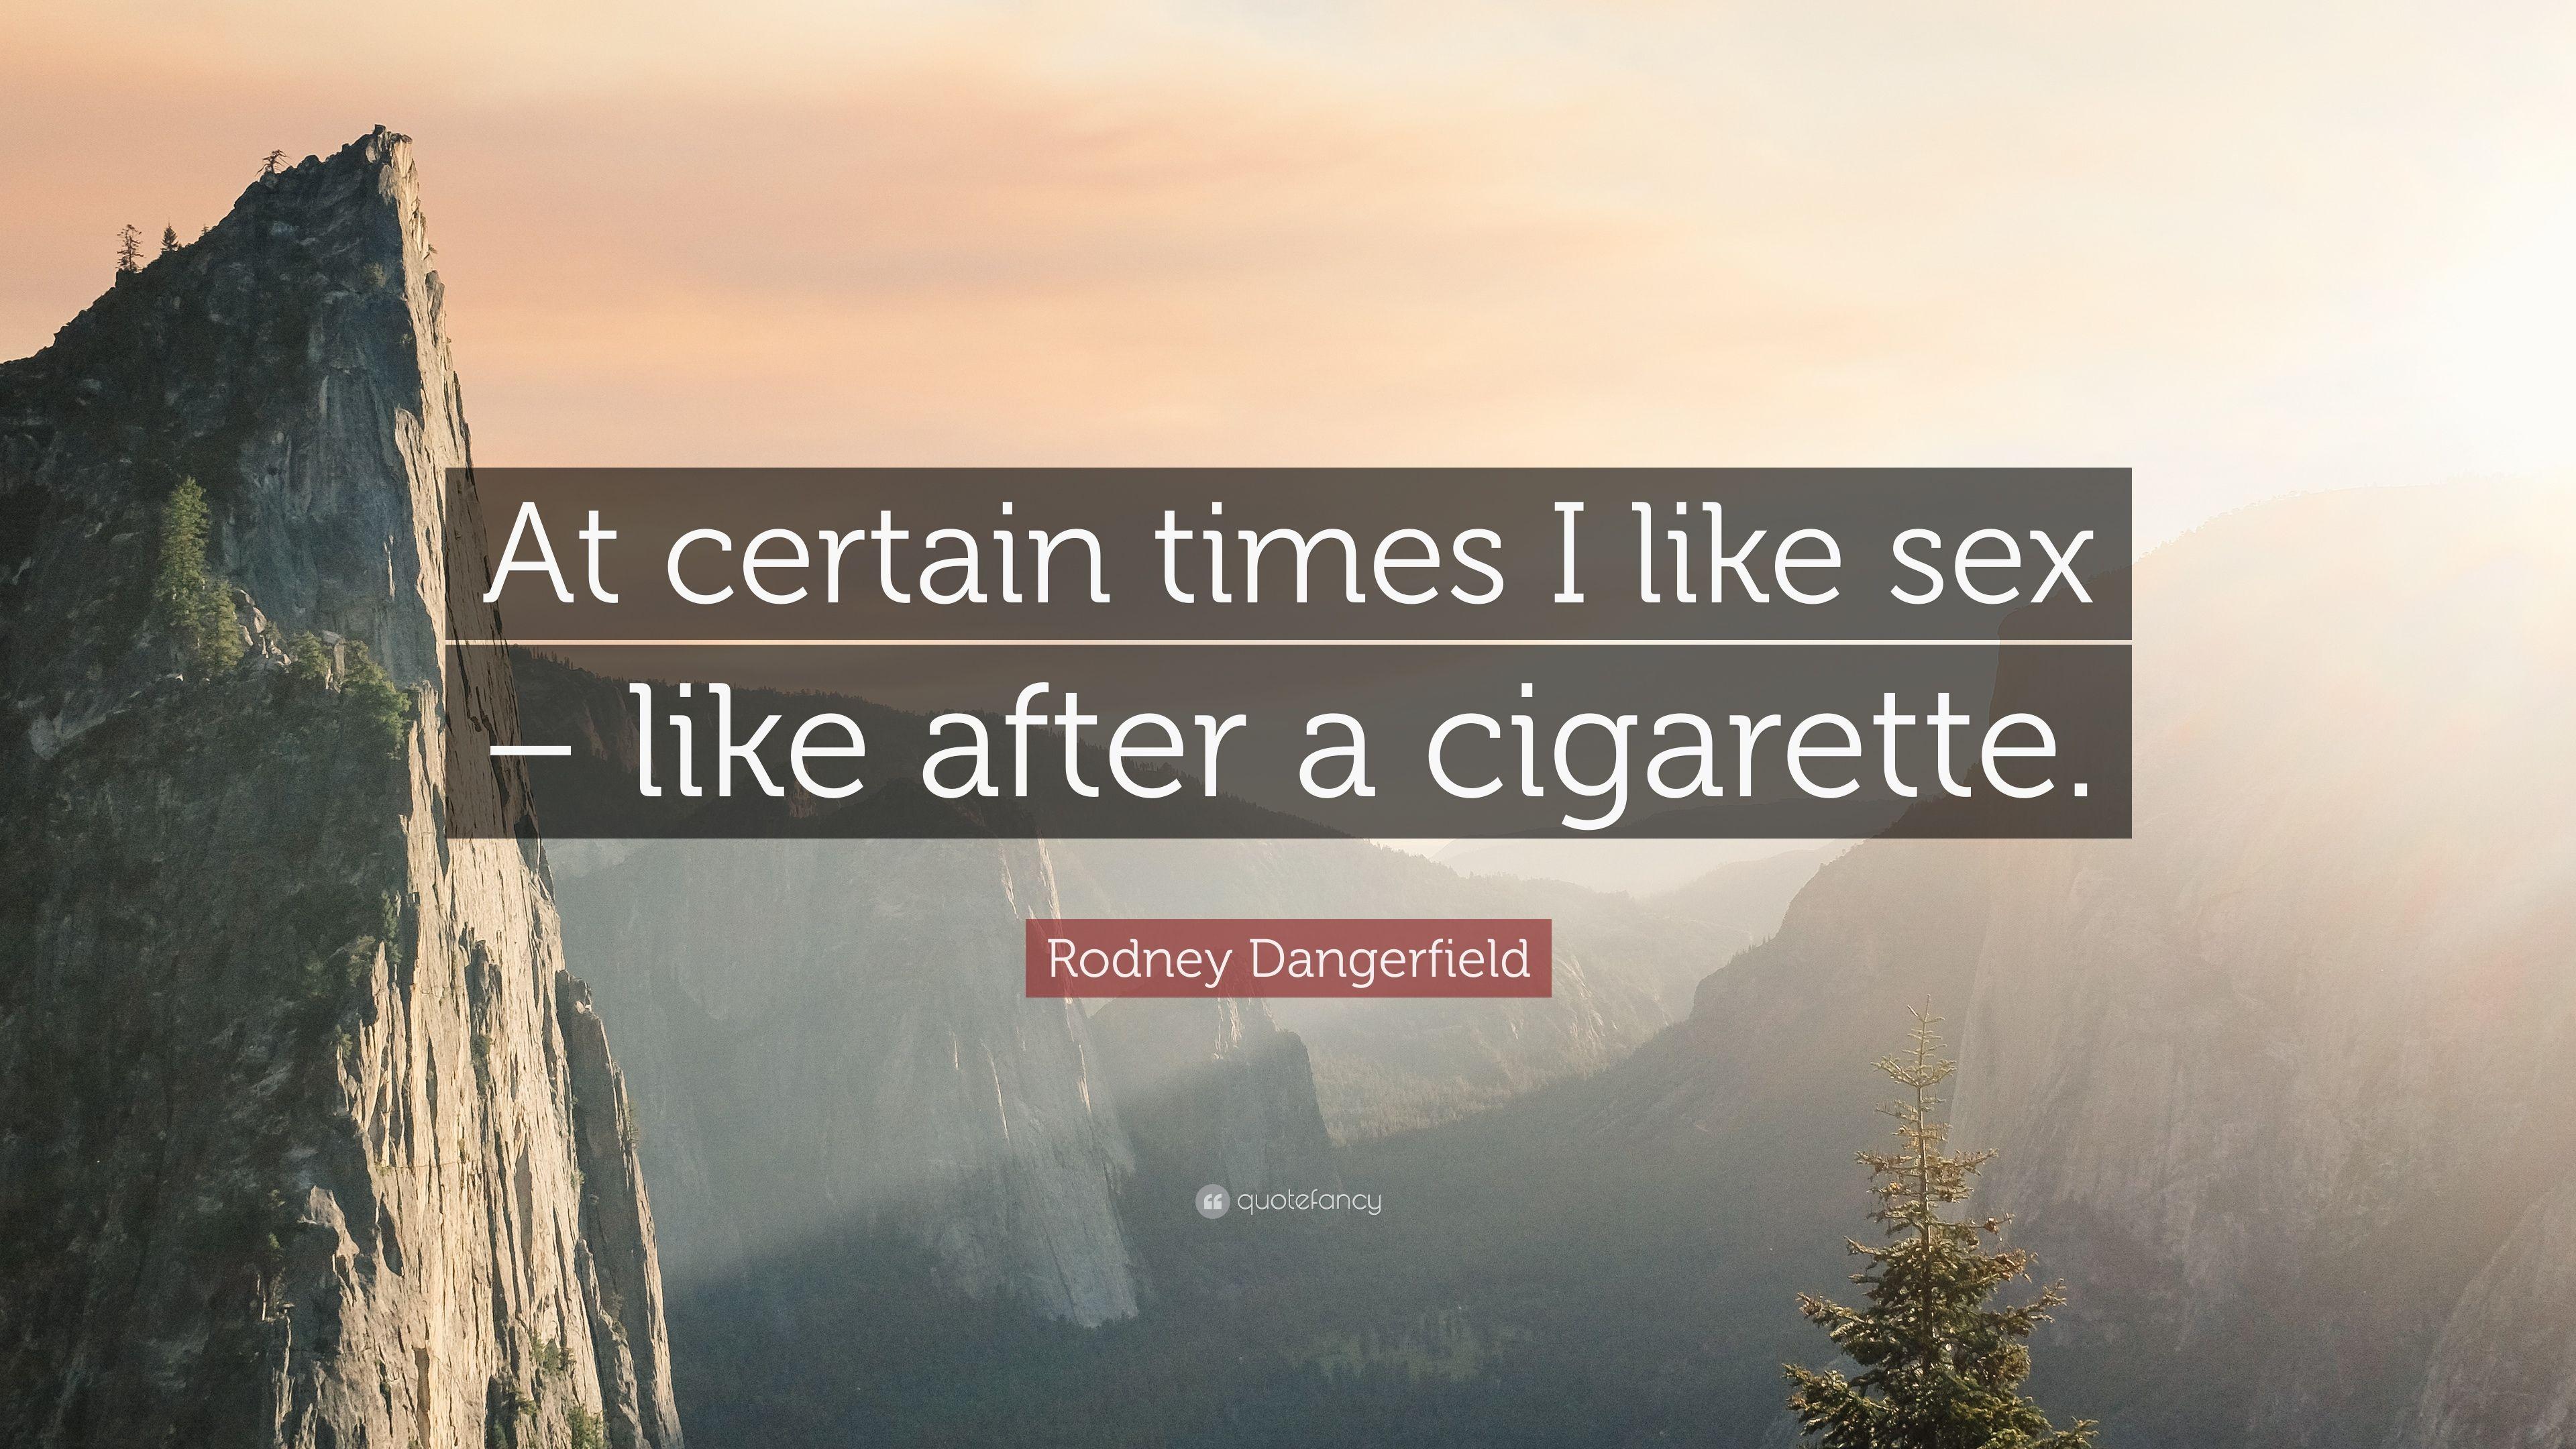 Rodney Dangerfield Quote: “At certain times I like sex